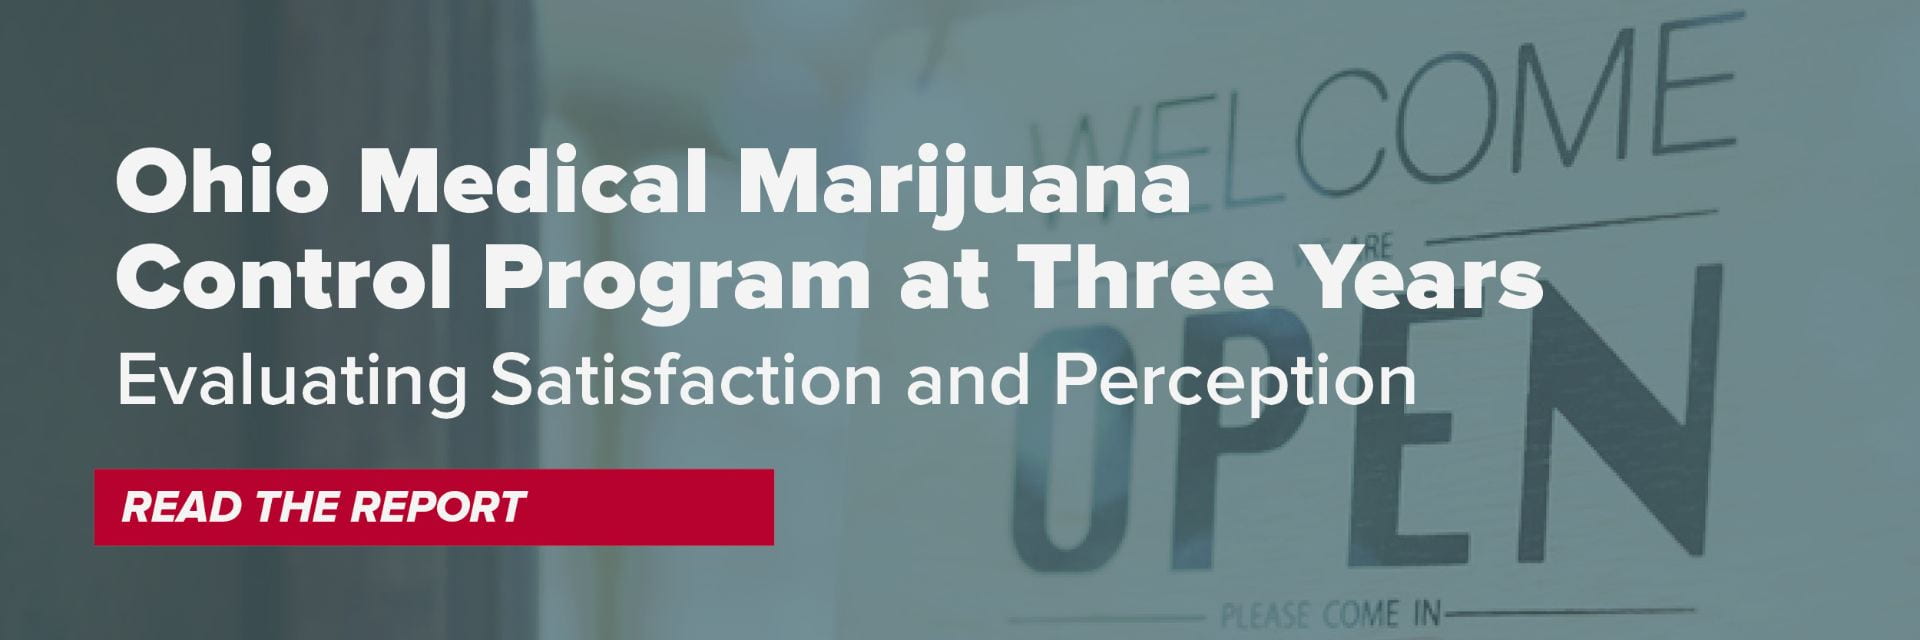 Image of a retail store and an open sign with text overly reading Ohio Medical Marijuana Control Program at Three Years: Evaluating Satisfaction and Perception